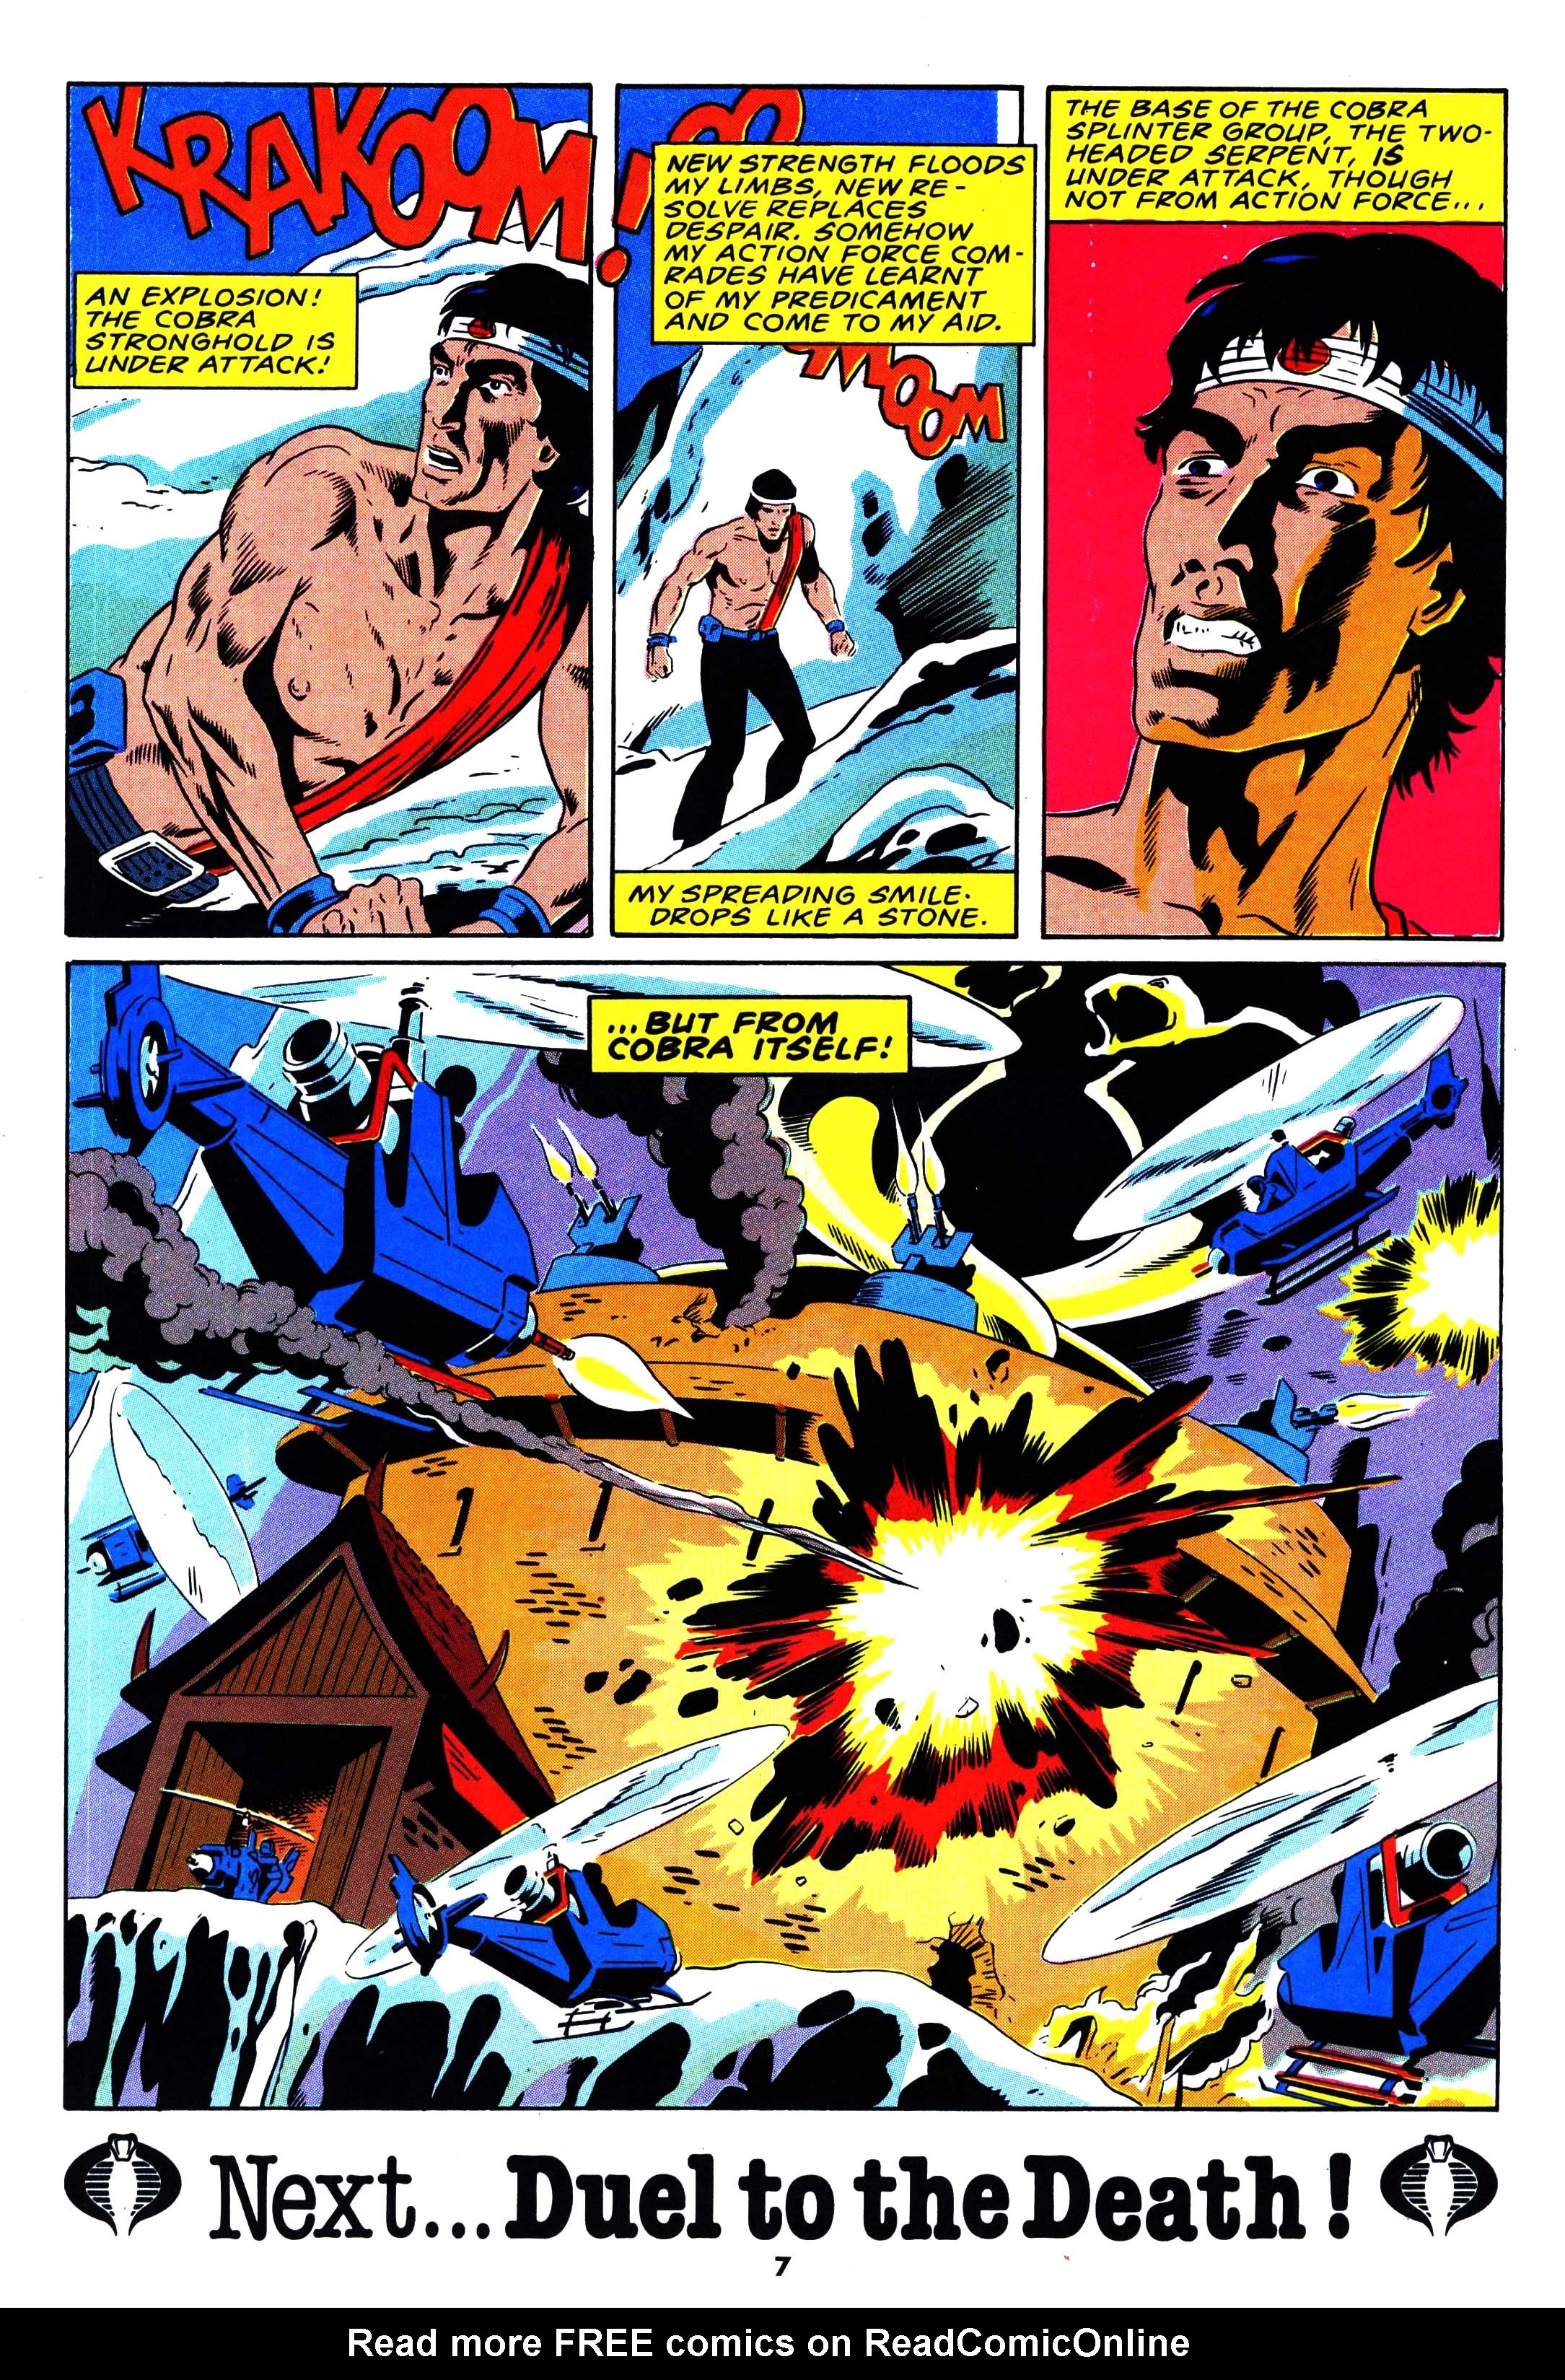 Read online Action Force comic -  Issue #16 - 7